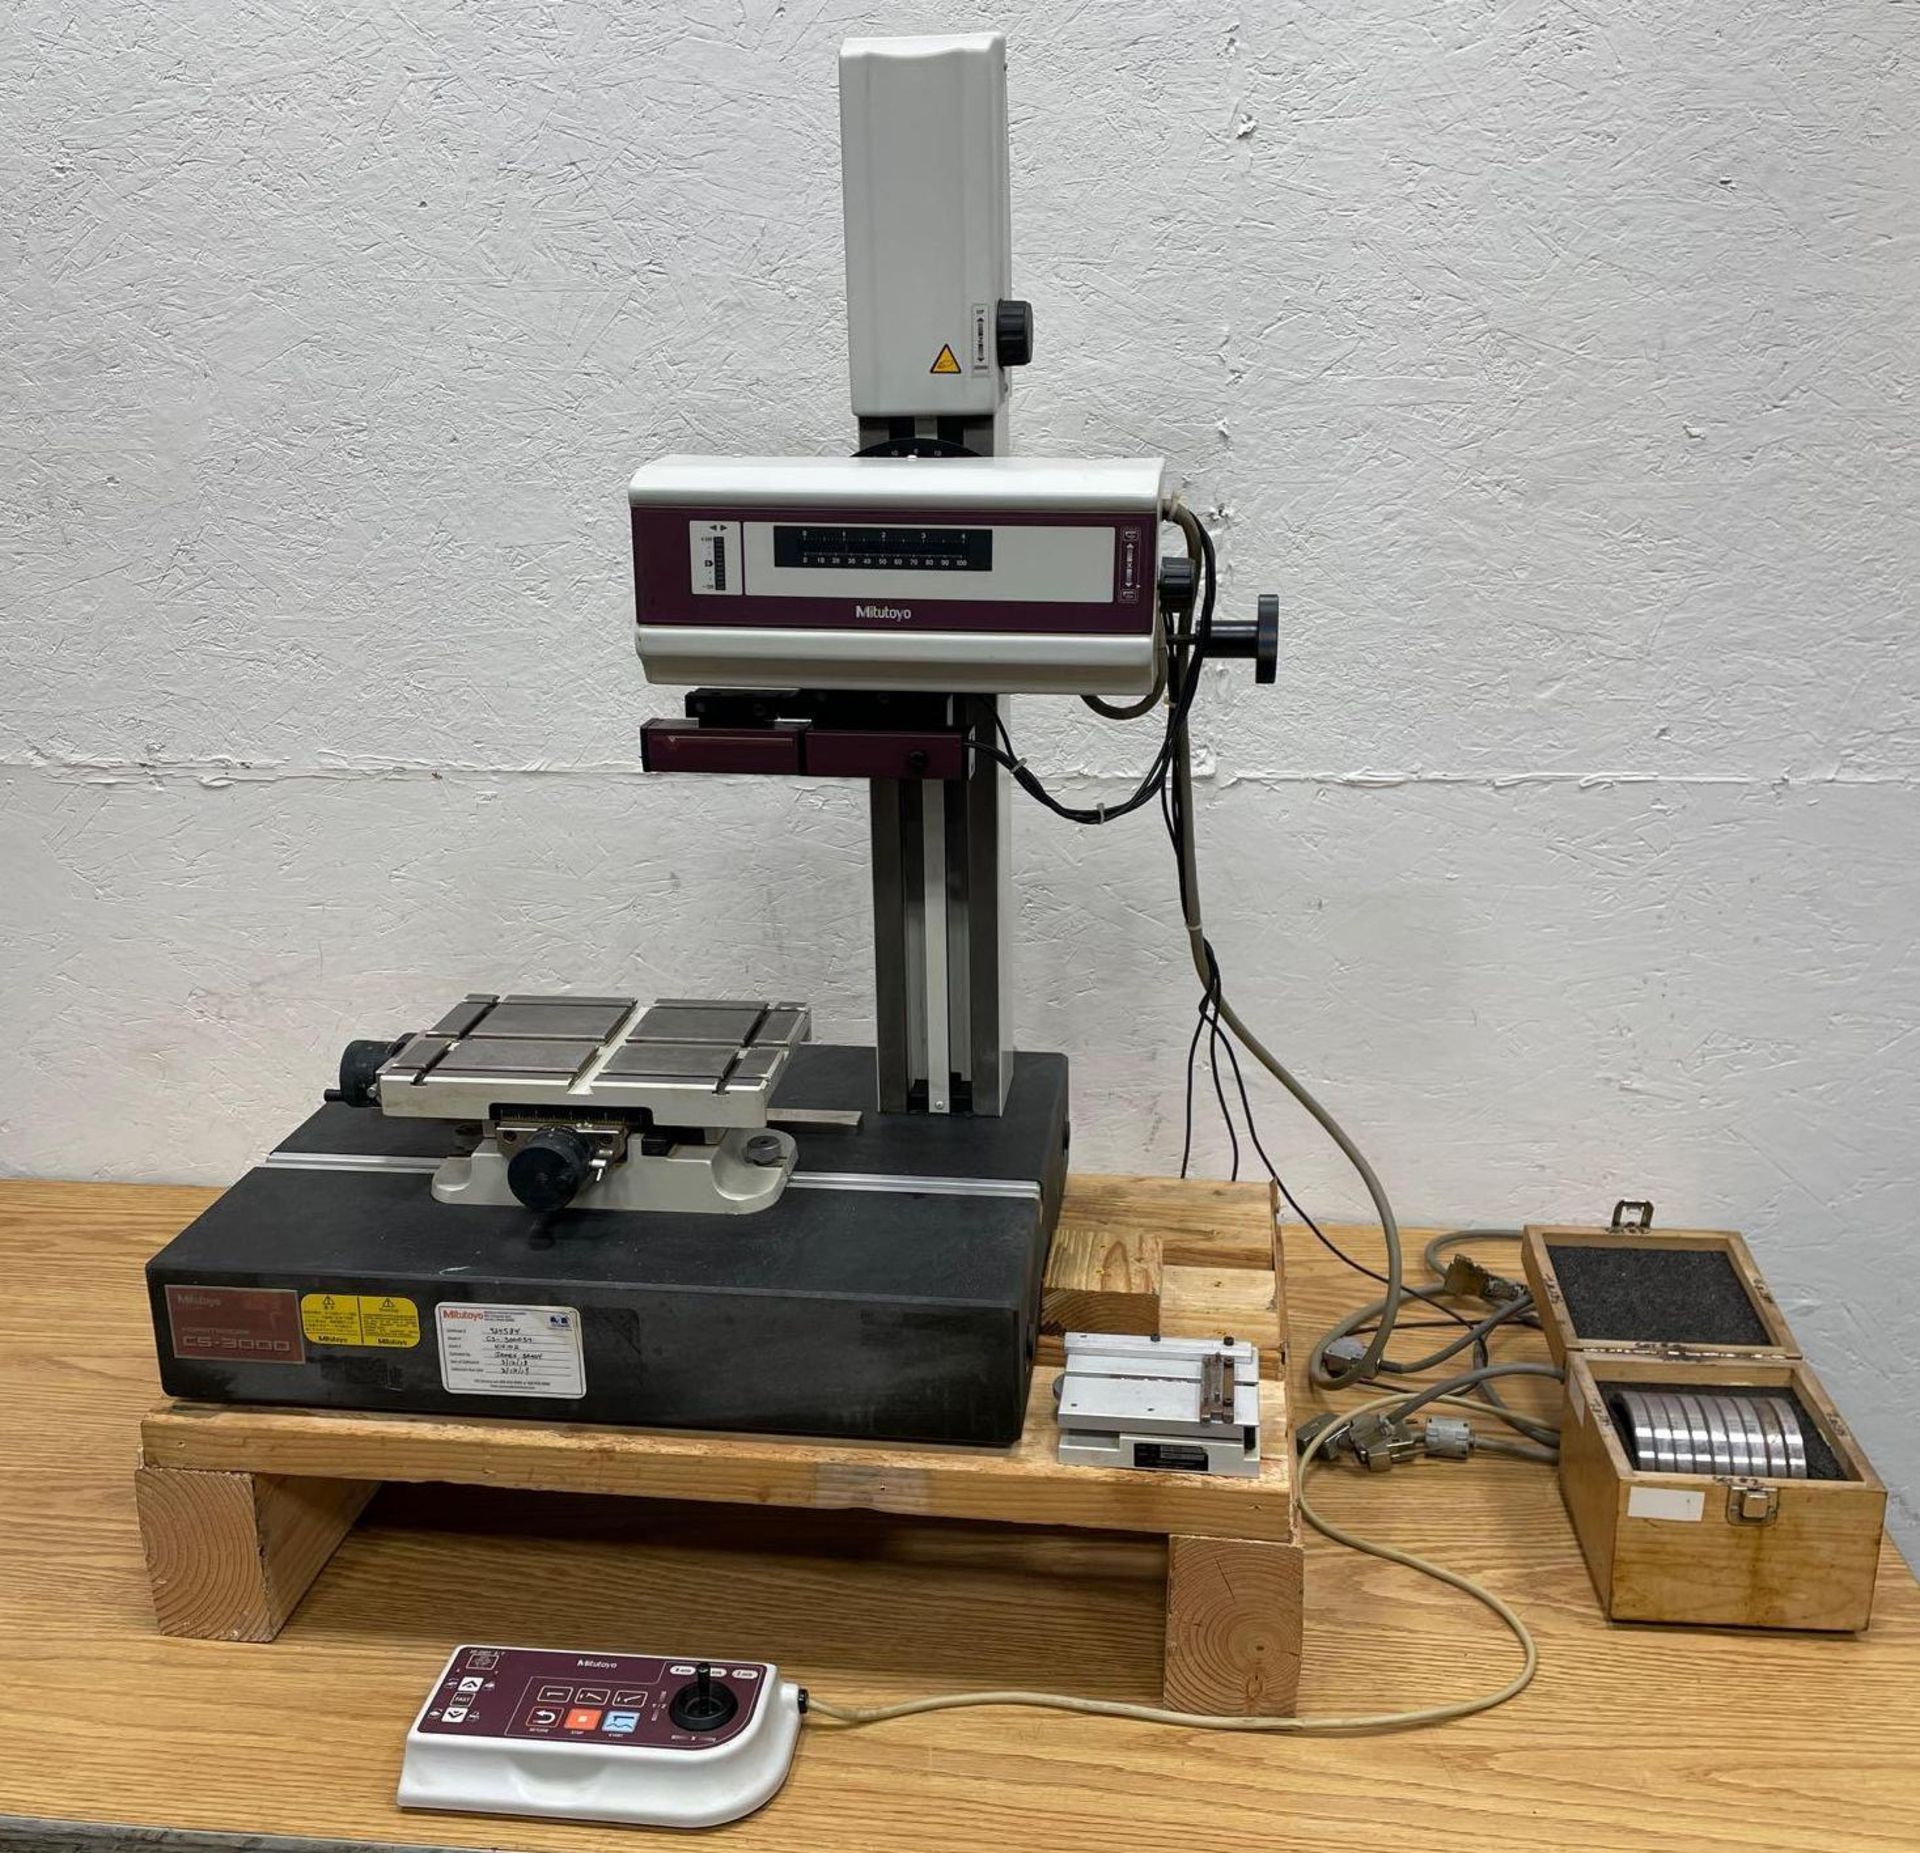 MITUTOYO CS-3000 FORMTRACER Contour & Surface Roughness System Profilometer